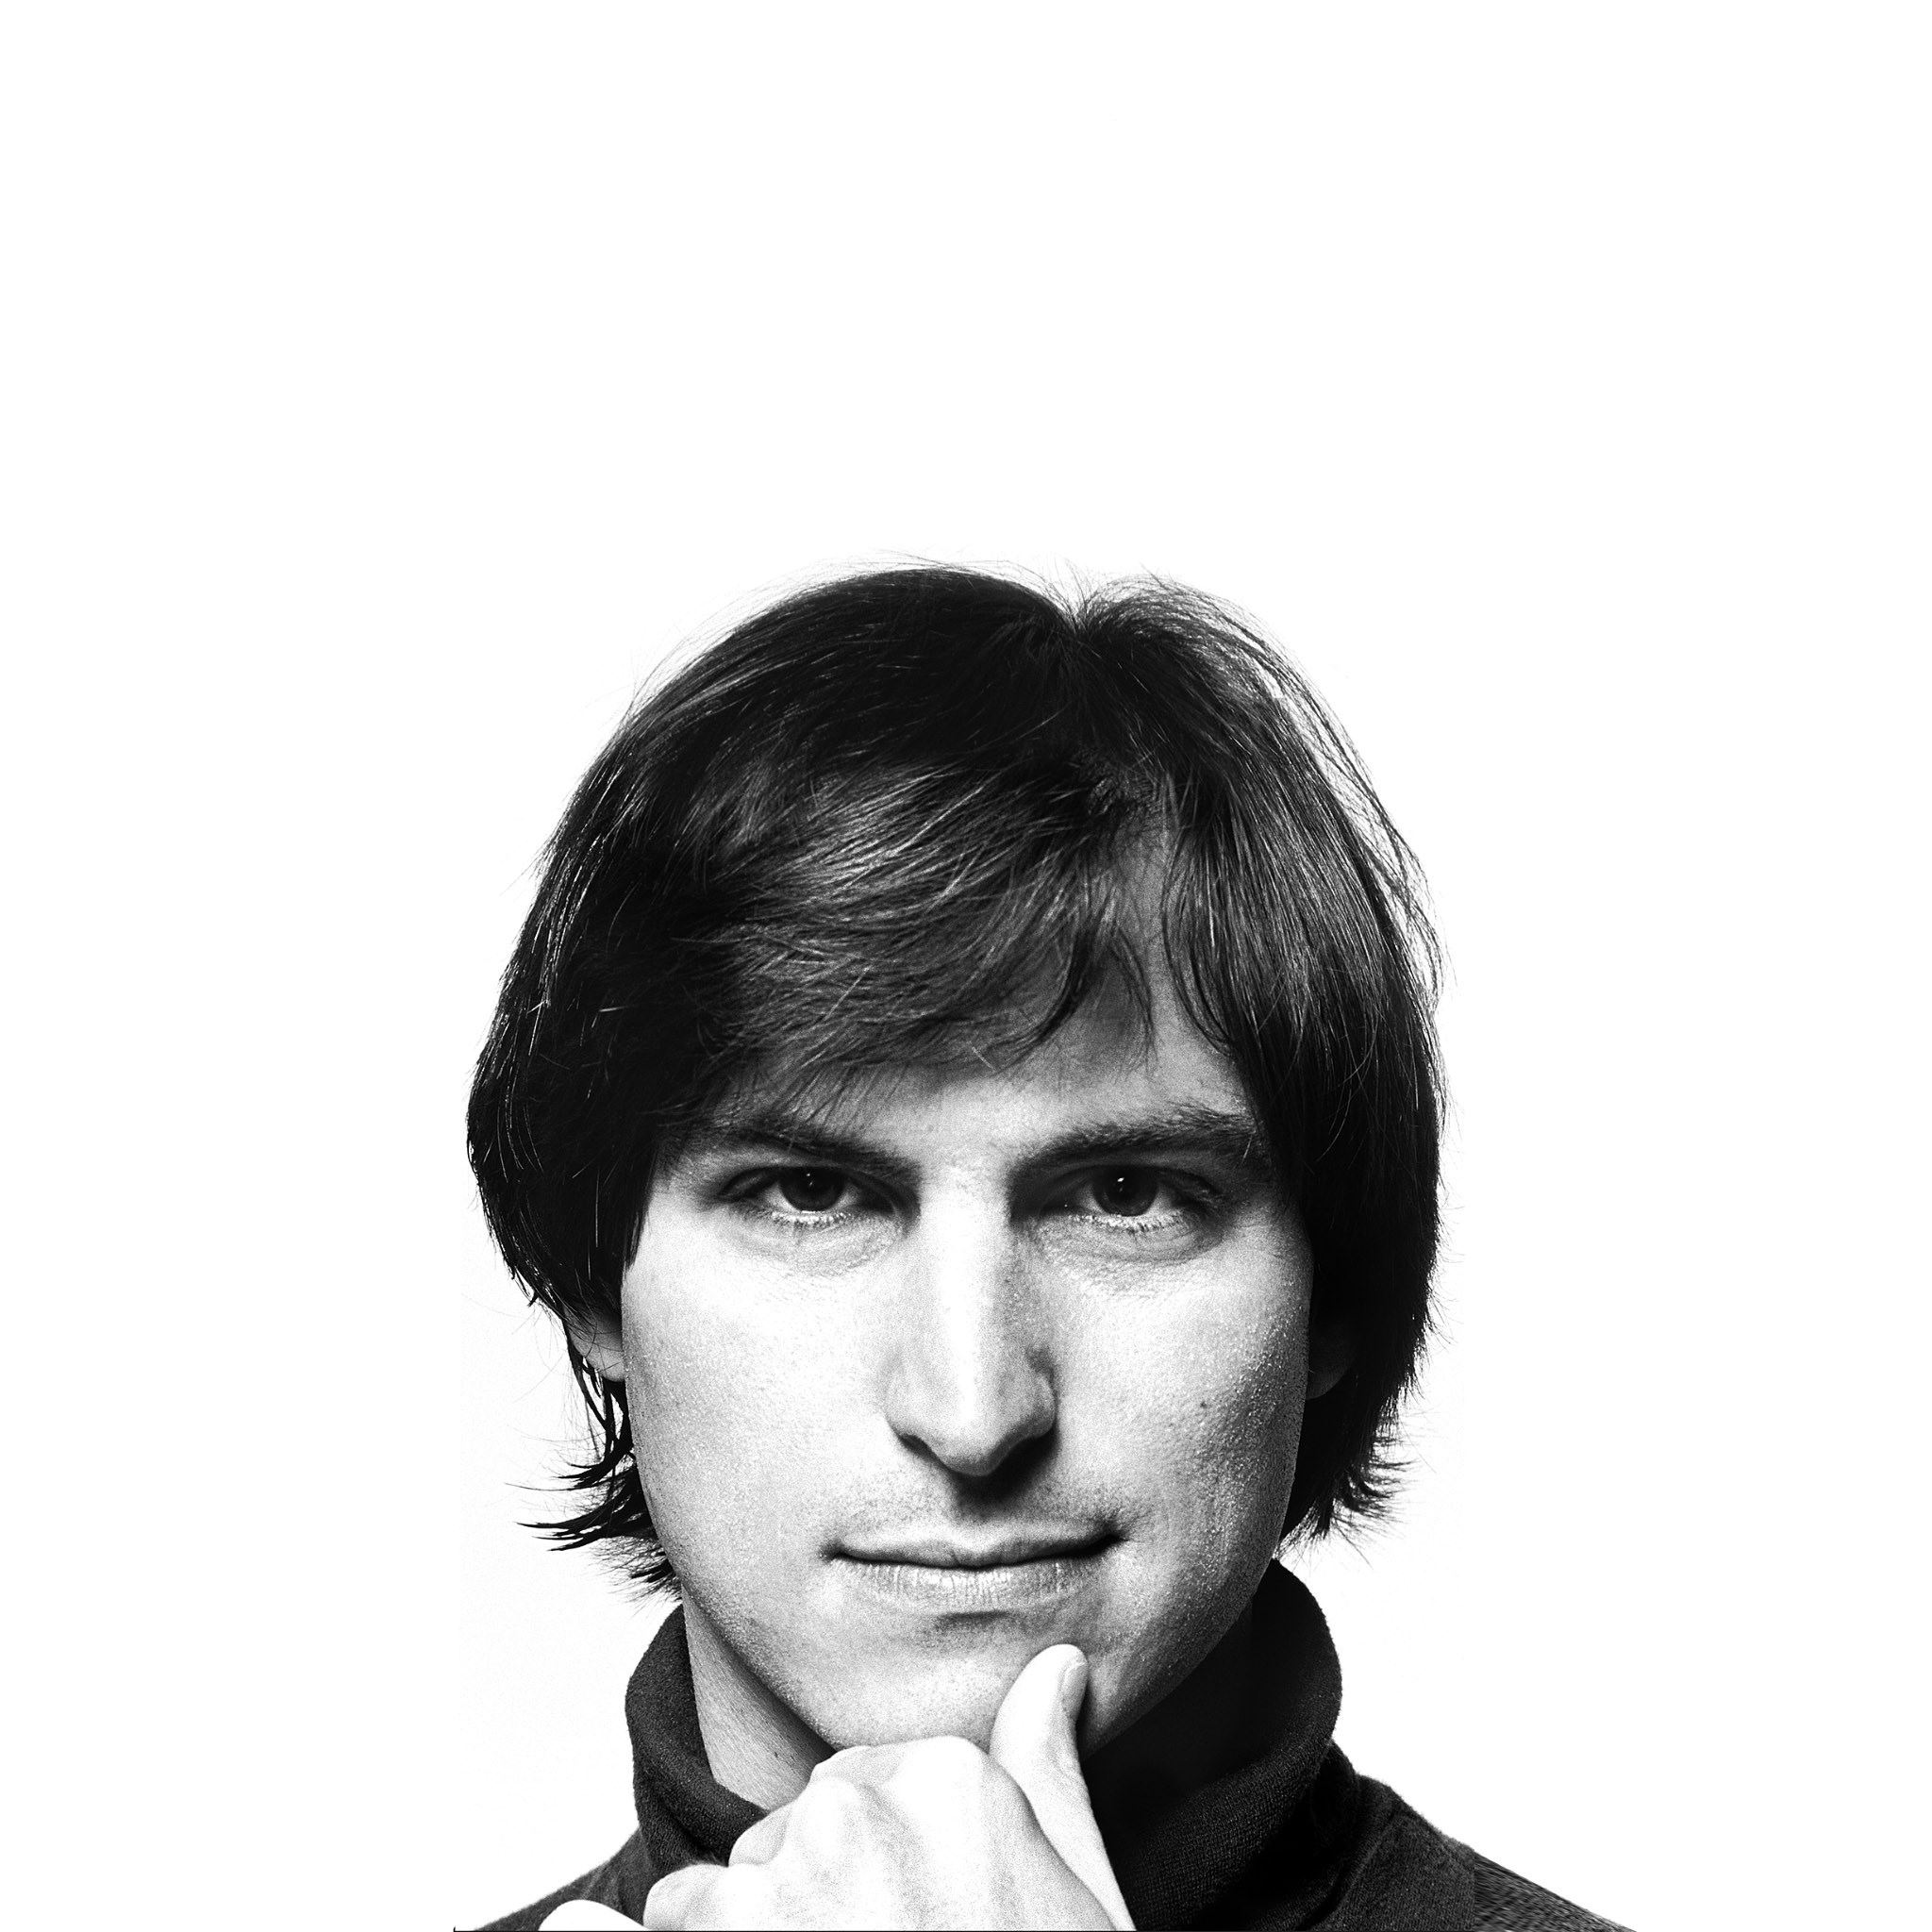 Young Jobs Steve Portrait Photography iPad Air Wallpapers Free Download